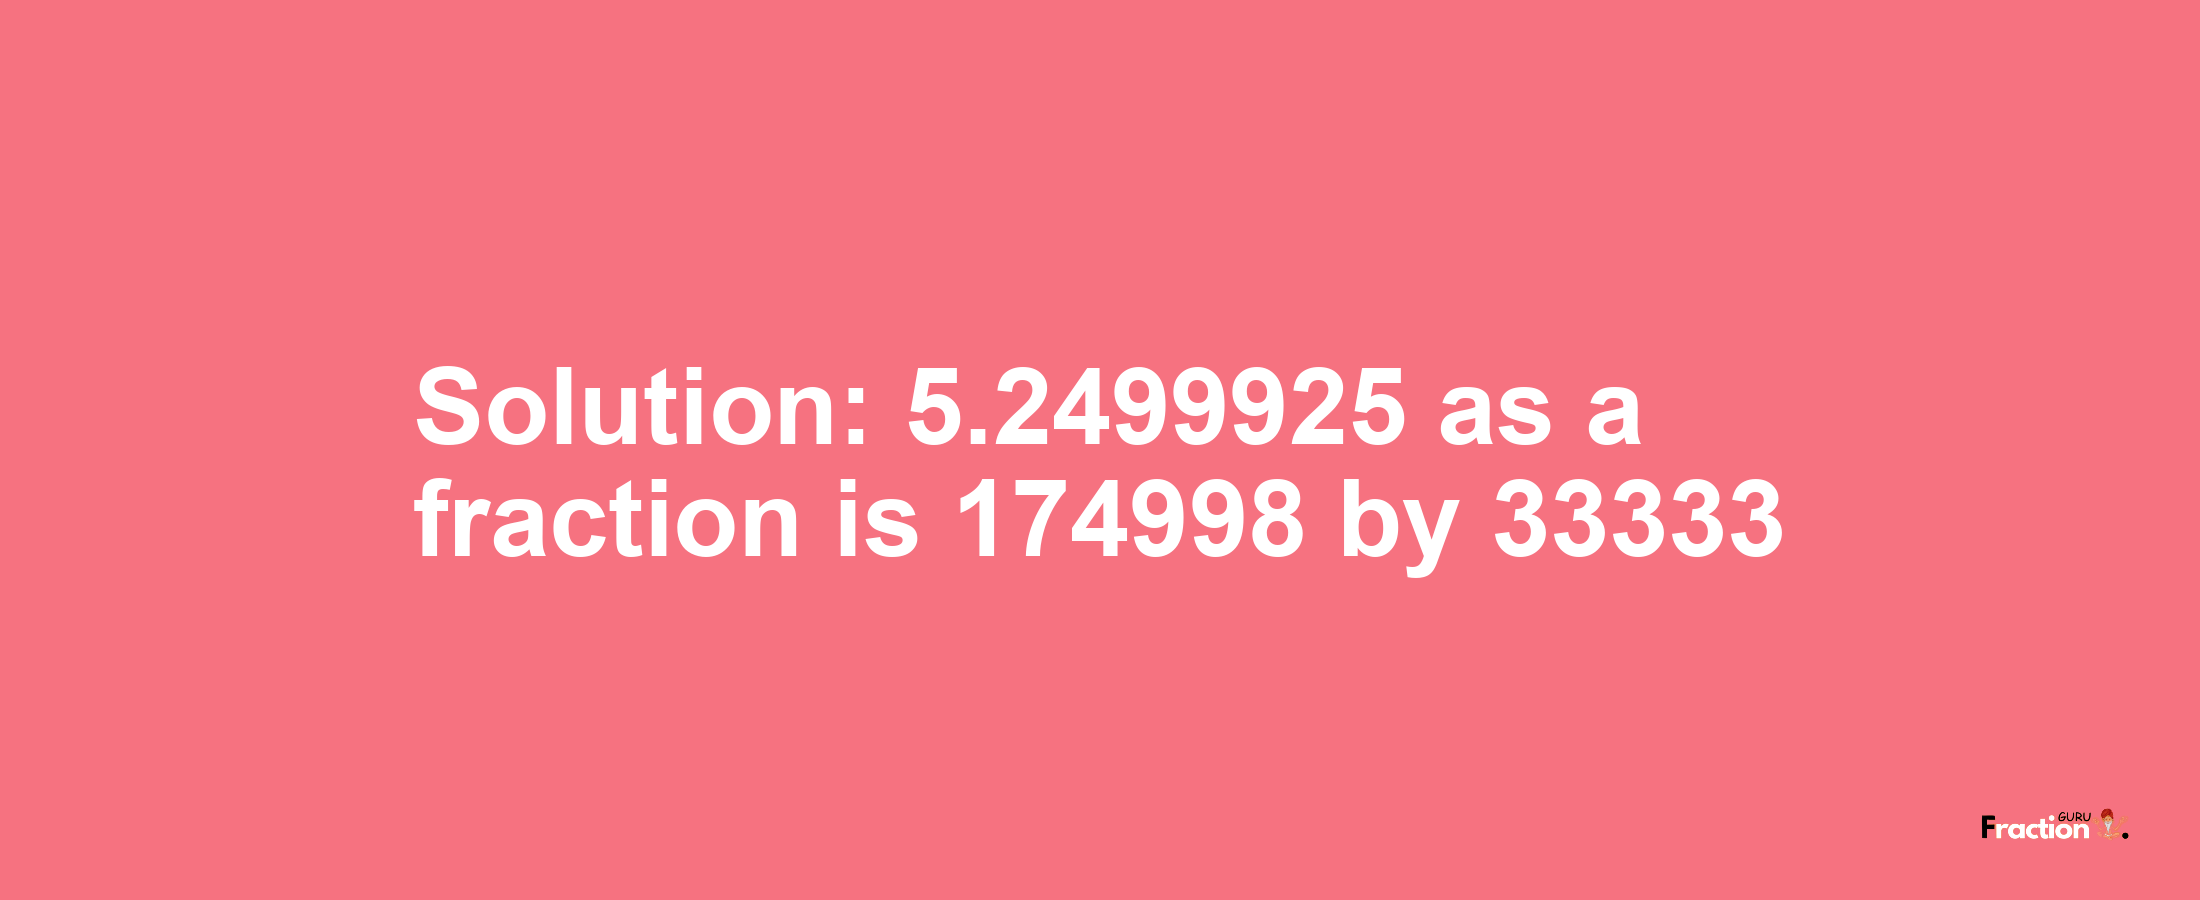 Solution:5.2499925 as a fraction is 174998/33333